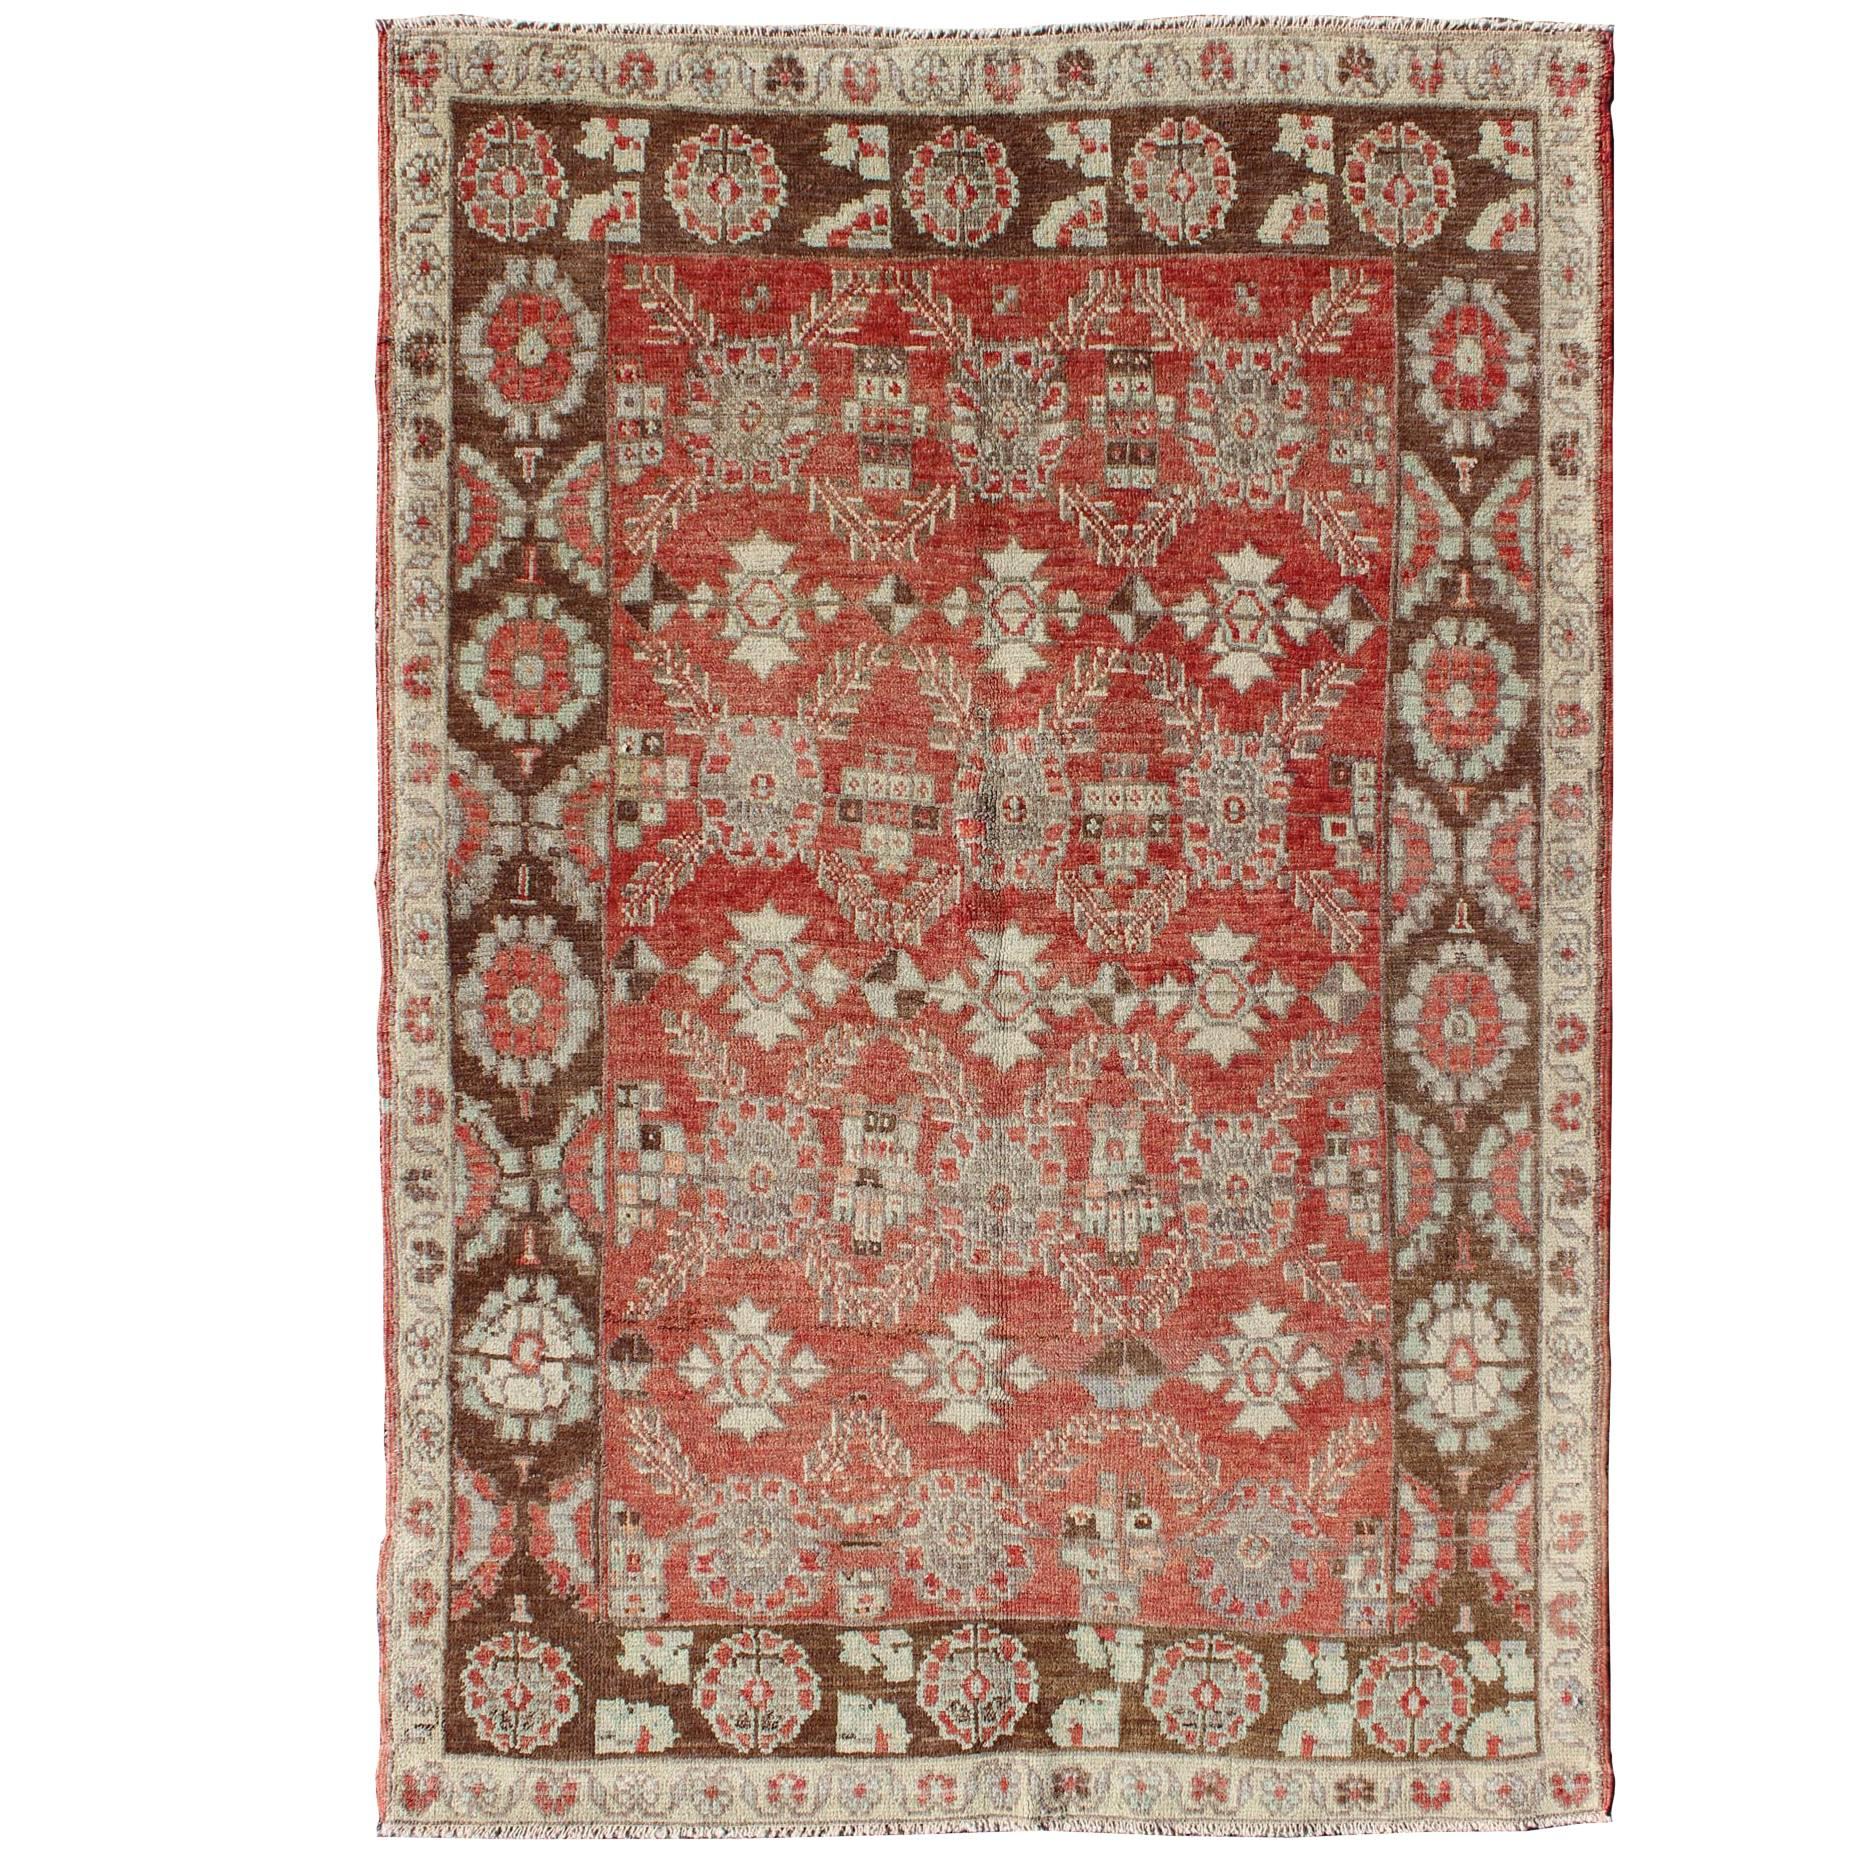 Oushak Rug With Interconnected Floral Designs in Red, Brown & Light Green For Sale